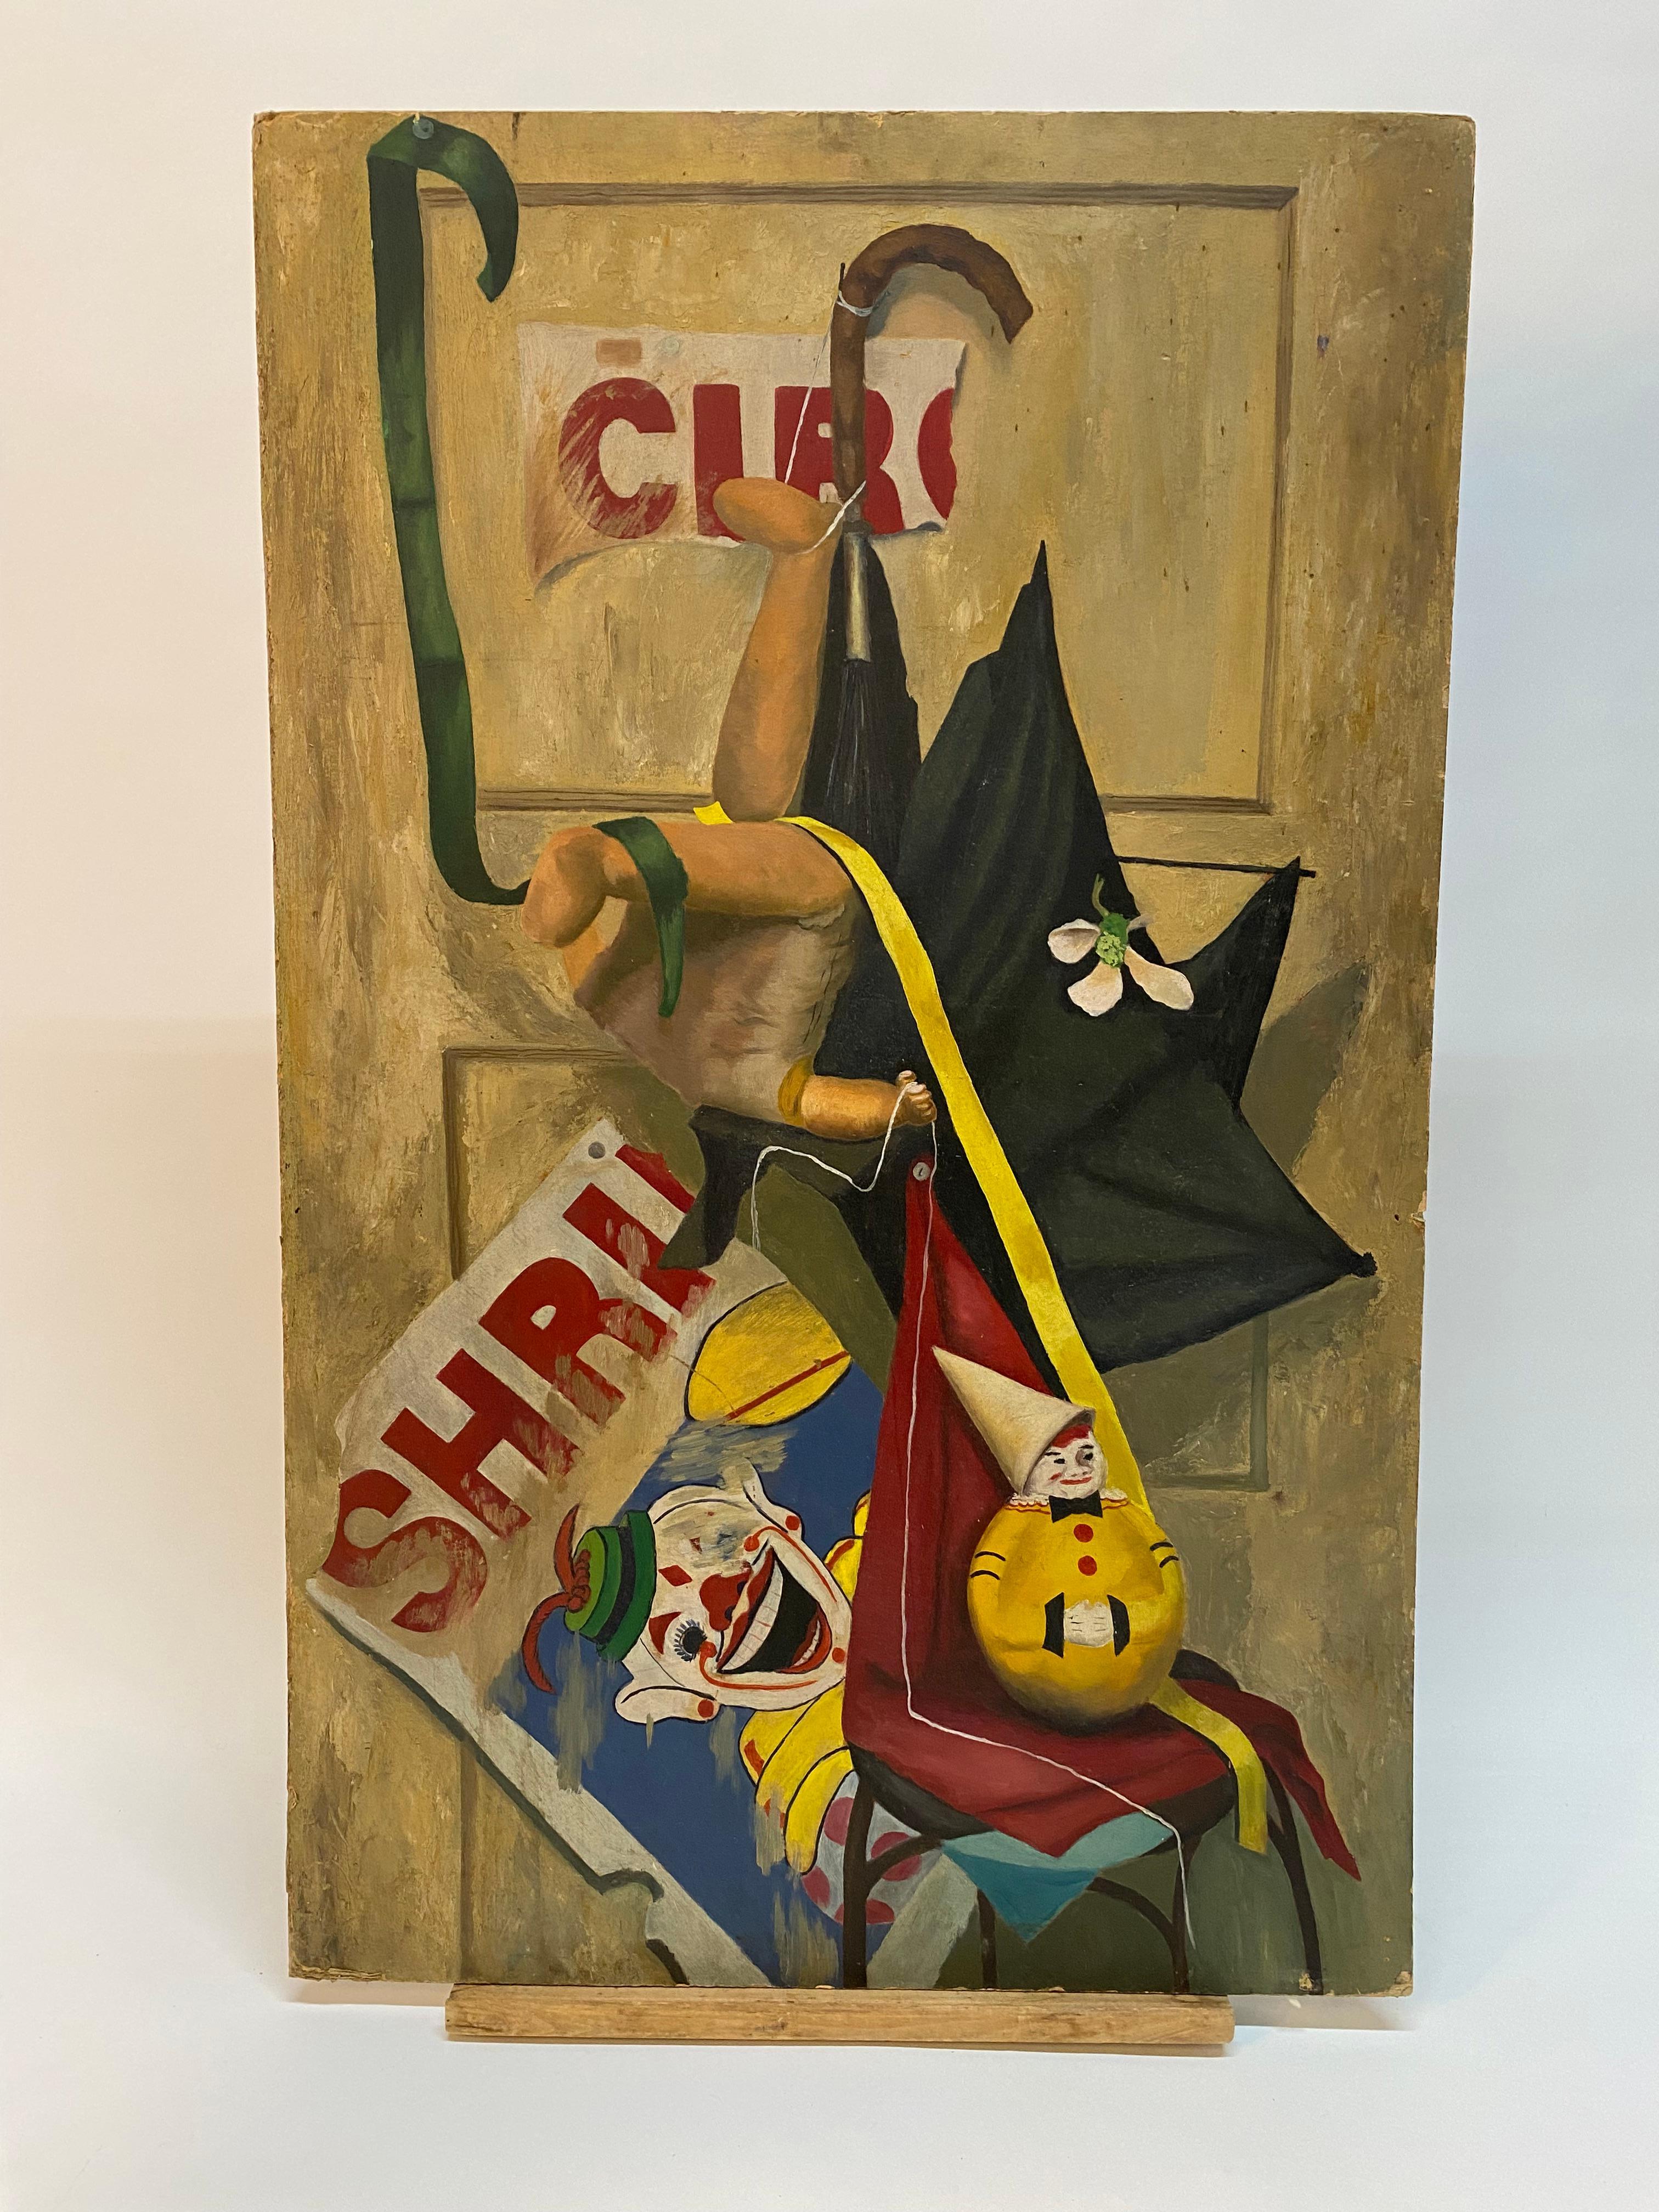 A modernist contemplative allegorical still life vanitas type painting on masonite board. Circa 1950. This work originates from a Western Connecticut estate. The work is unsigned. The artist renders several derelict objects in paint: a worn and torn